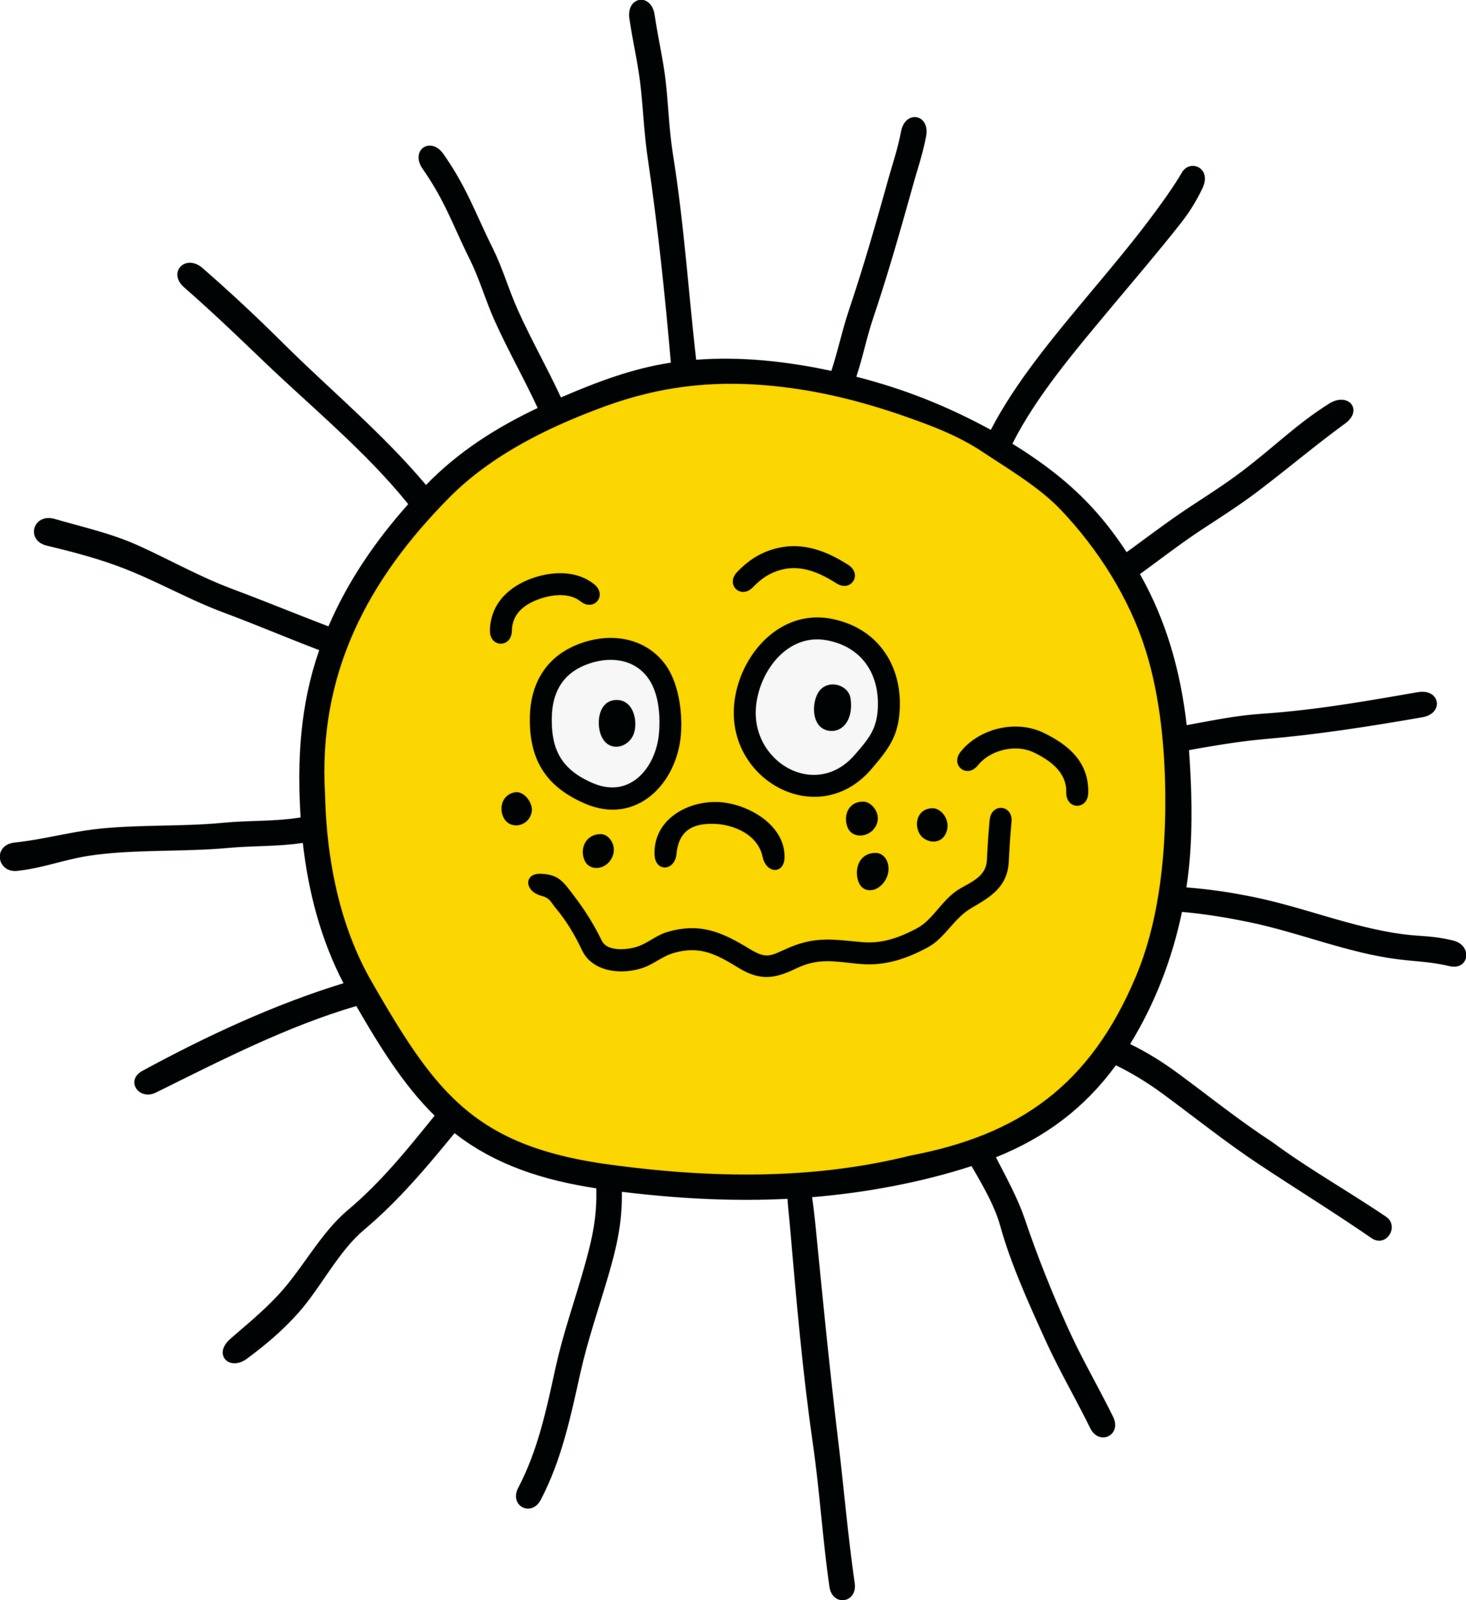 The vector illustration of a hand drawing funny sun